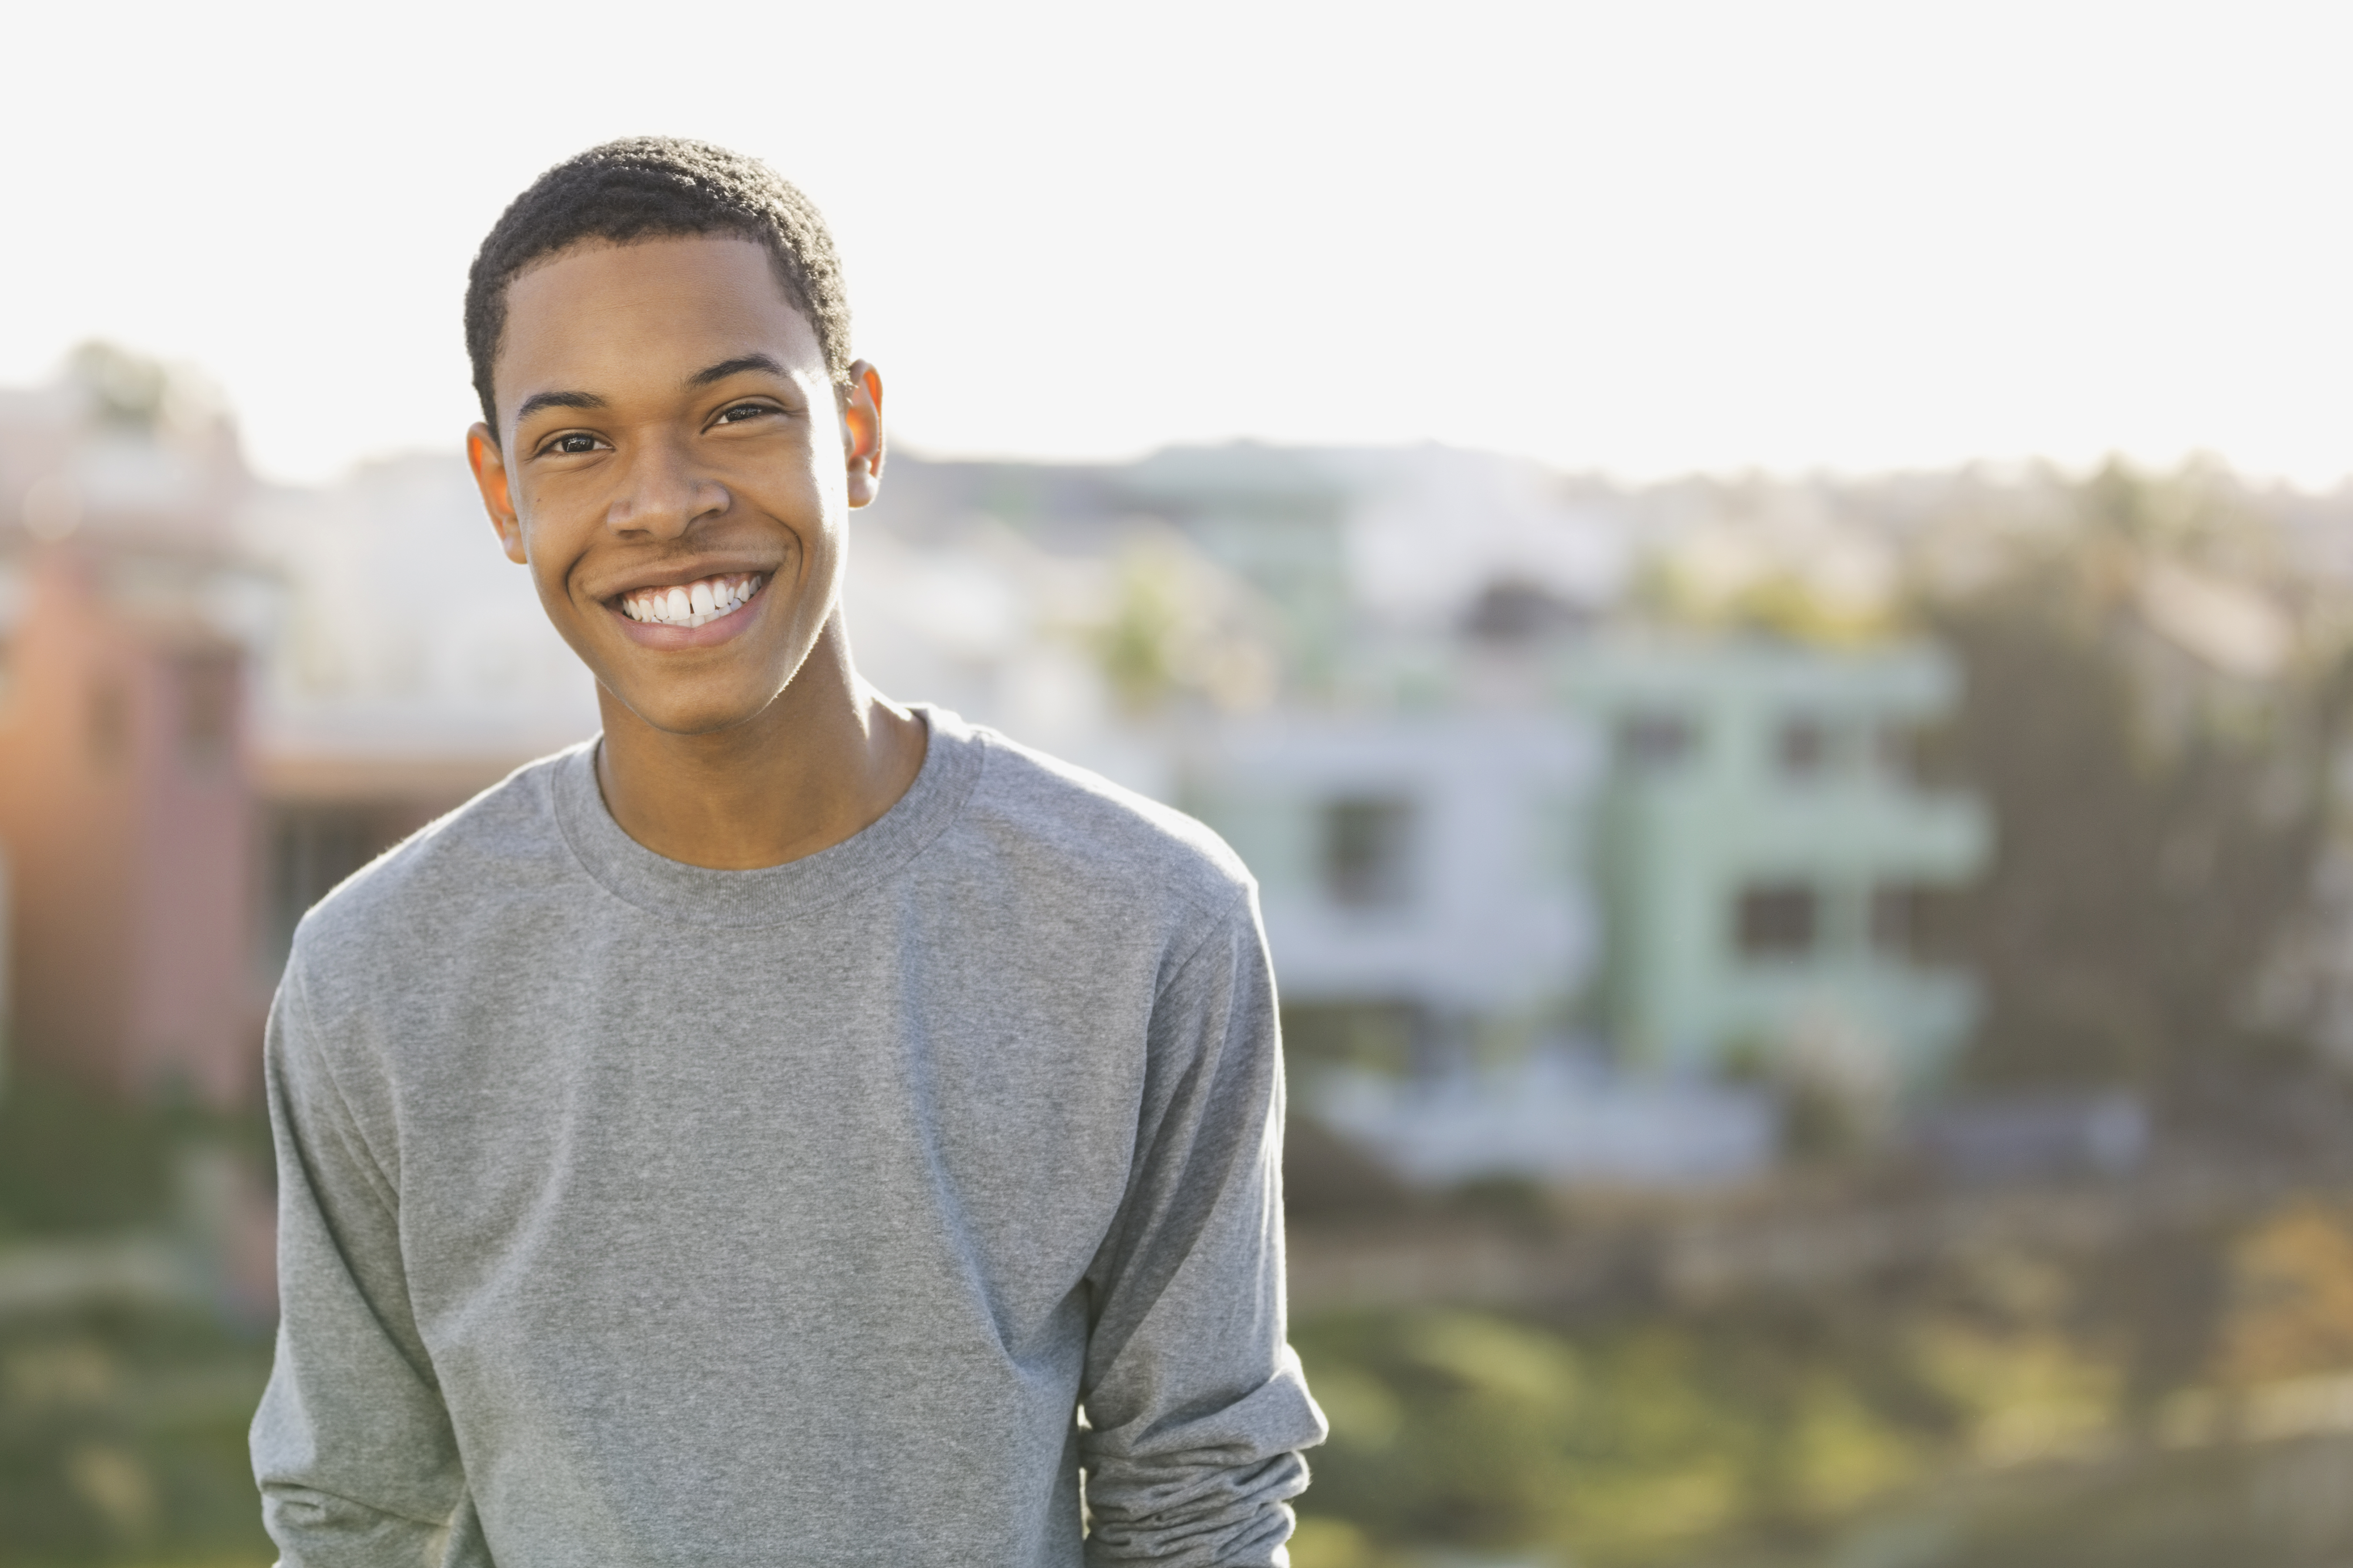 Black man with a warm smile looking straight ahead with sunshine in the background